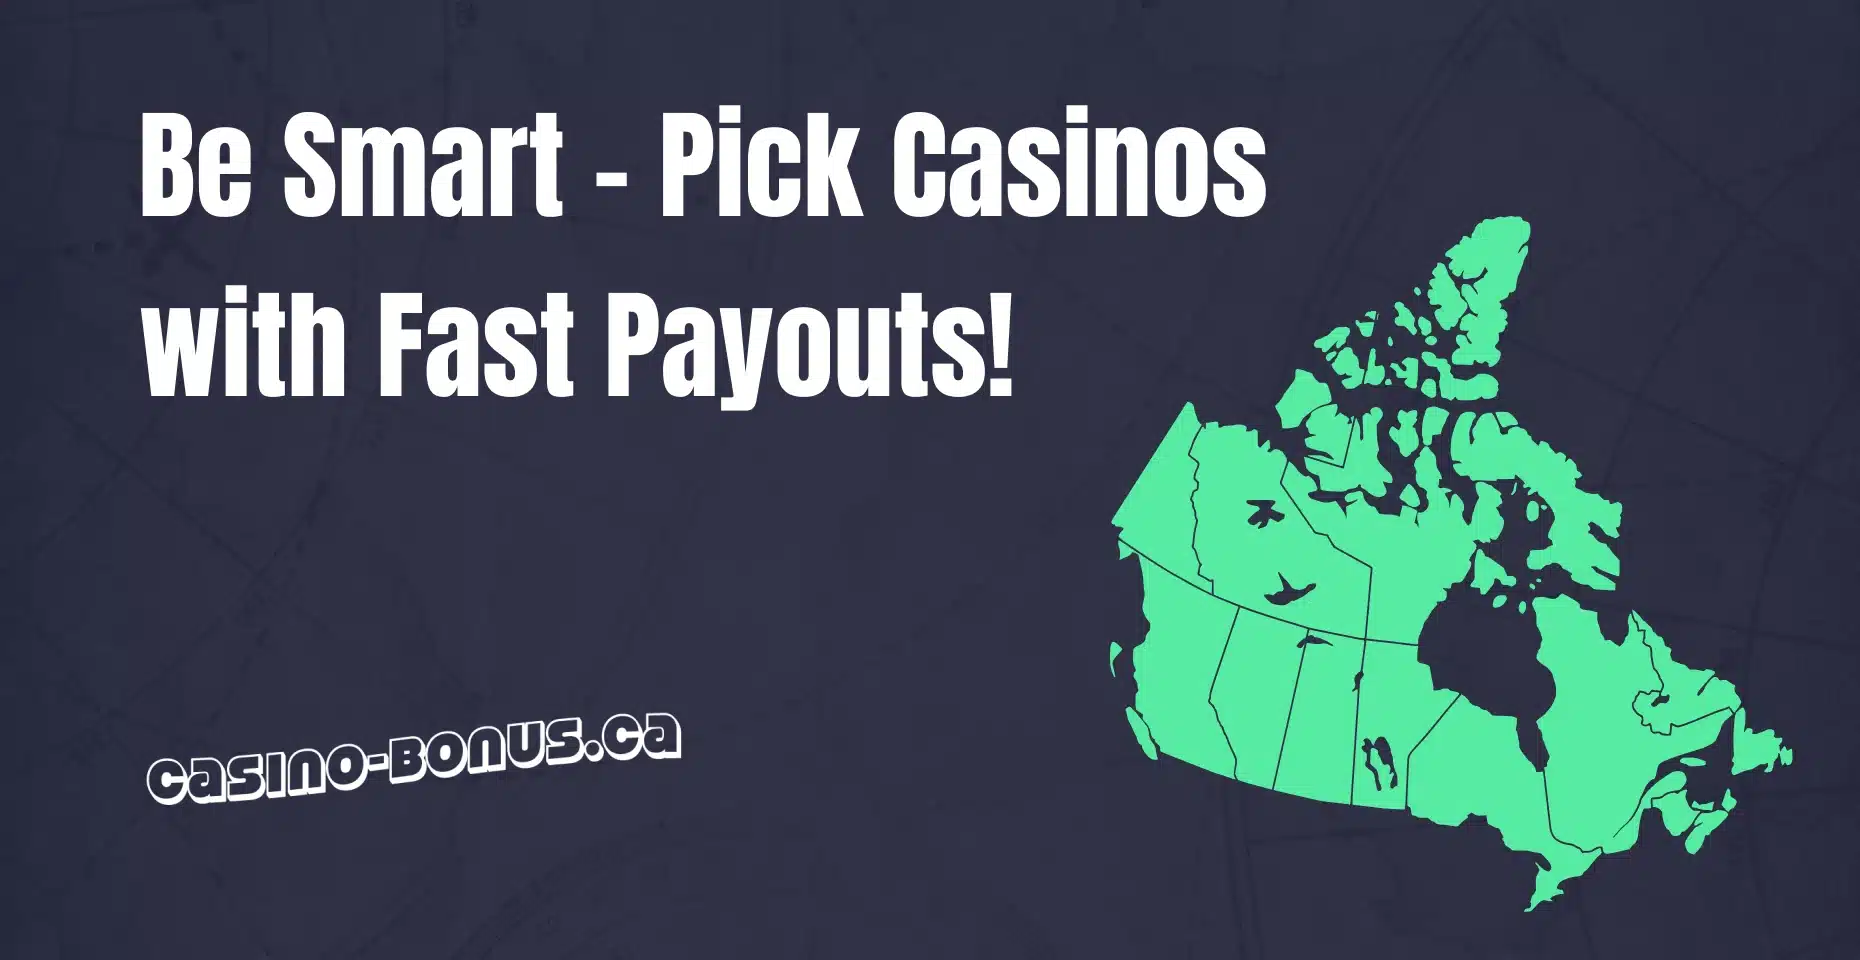 fast payout casinos - instant withdrawals